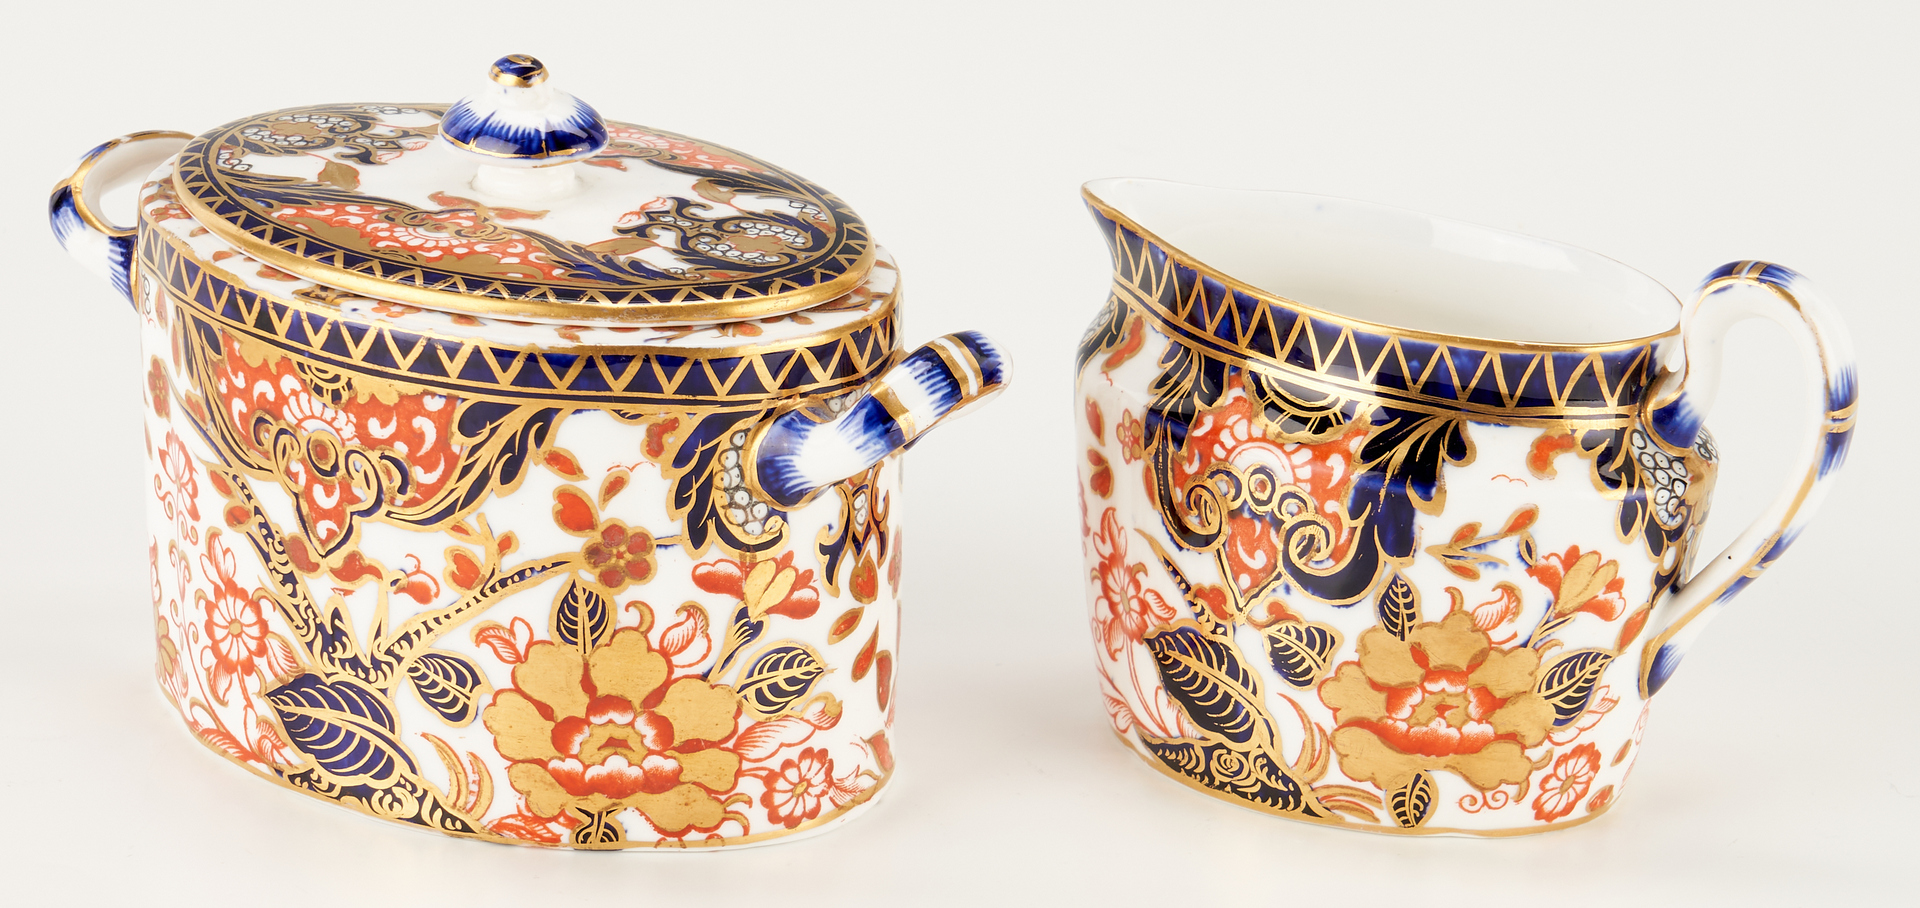 Lot 957: Royal Crown Derby Tea Set and Revolving Stand, "Old Imari"